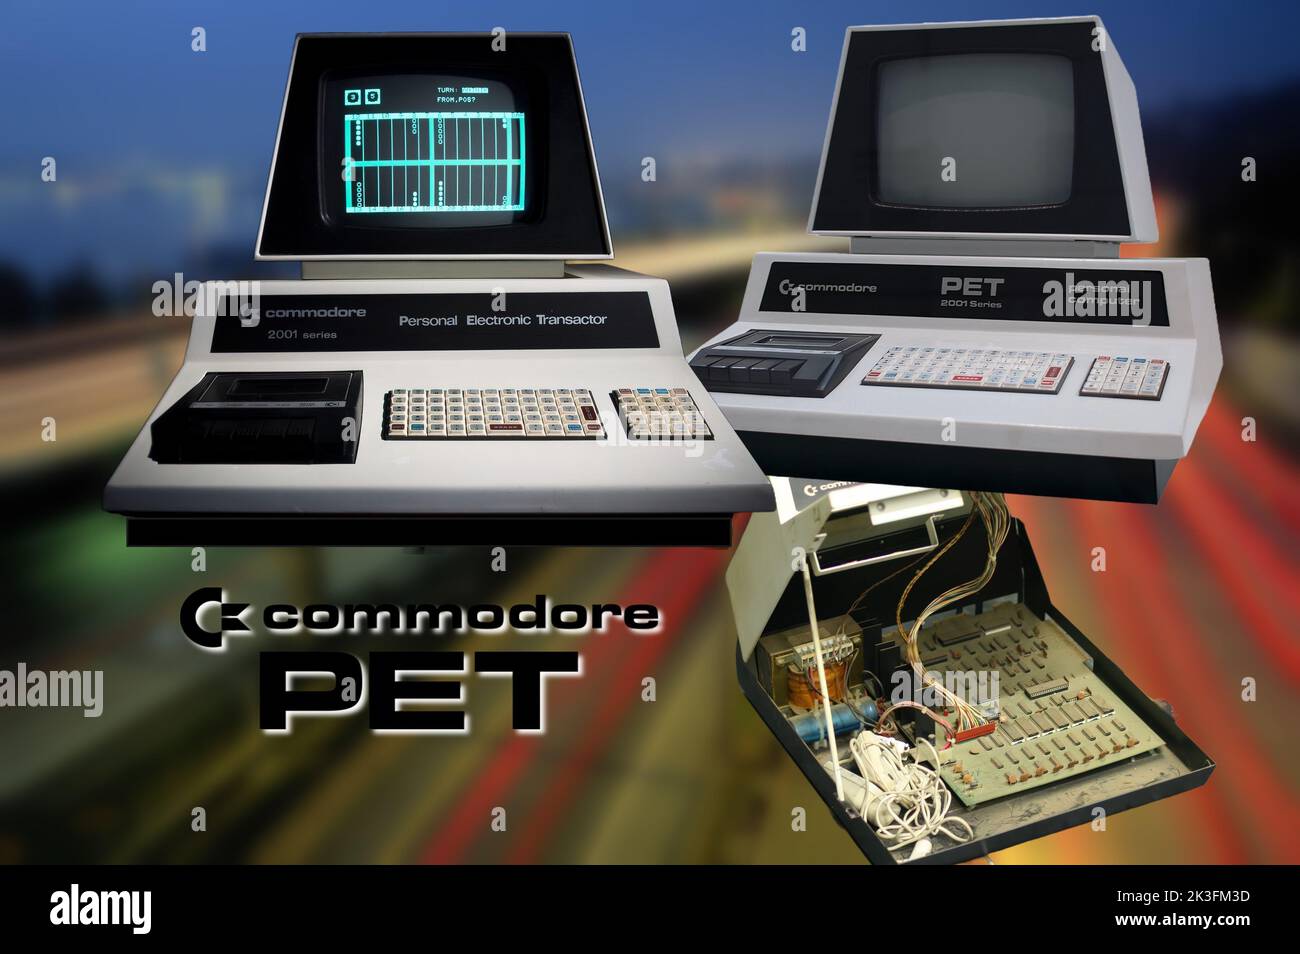 Pet produced and sold by Commodore Ltd. in 1977 was one of the first COMPUTERS that represented a breakthrough in the world of personal computers. Stock Photo